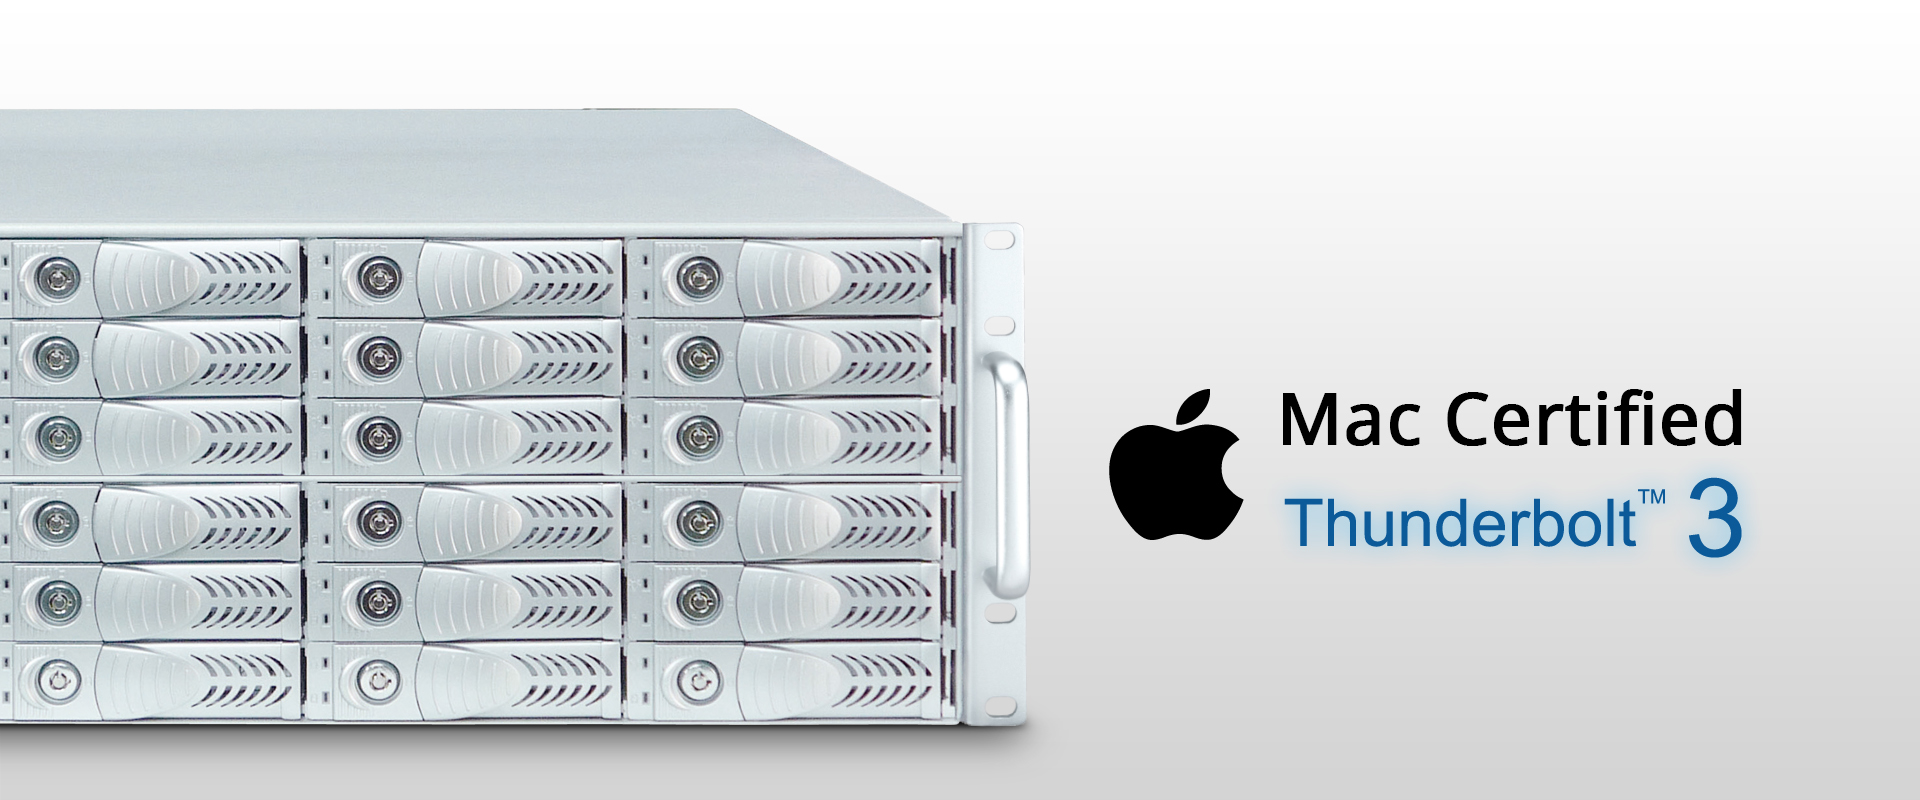 Netstor NA381TB3 has passed Apple's strict certification test process and is Mac certified.